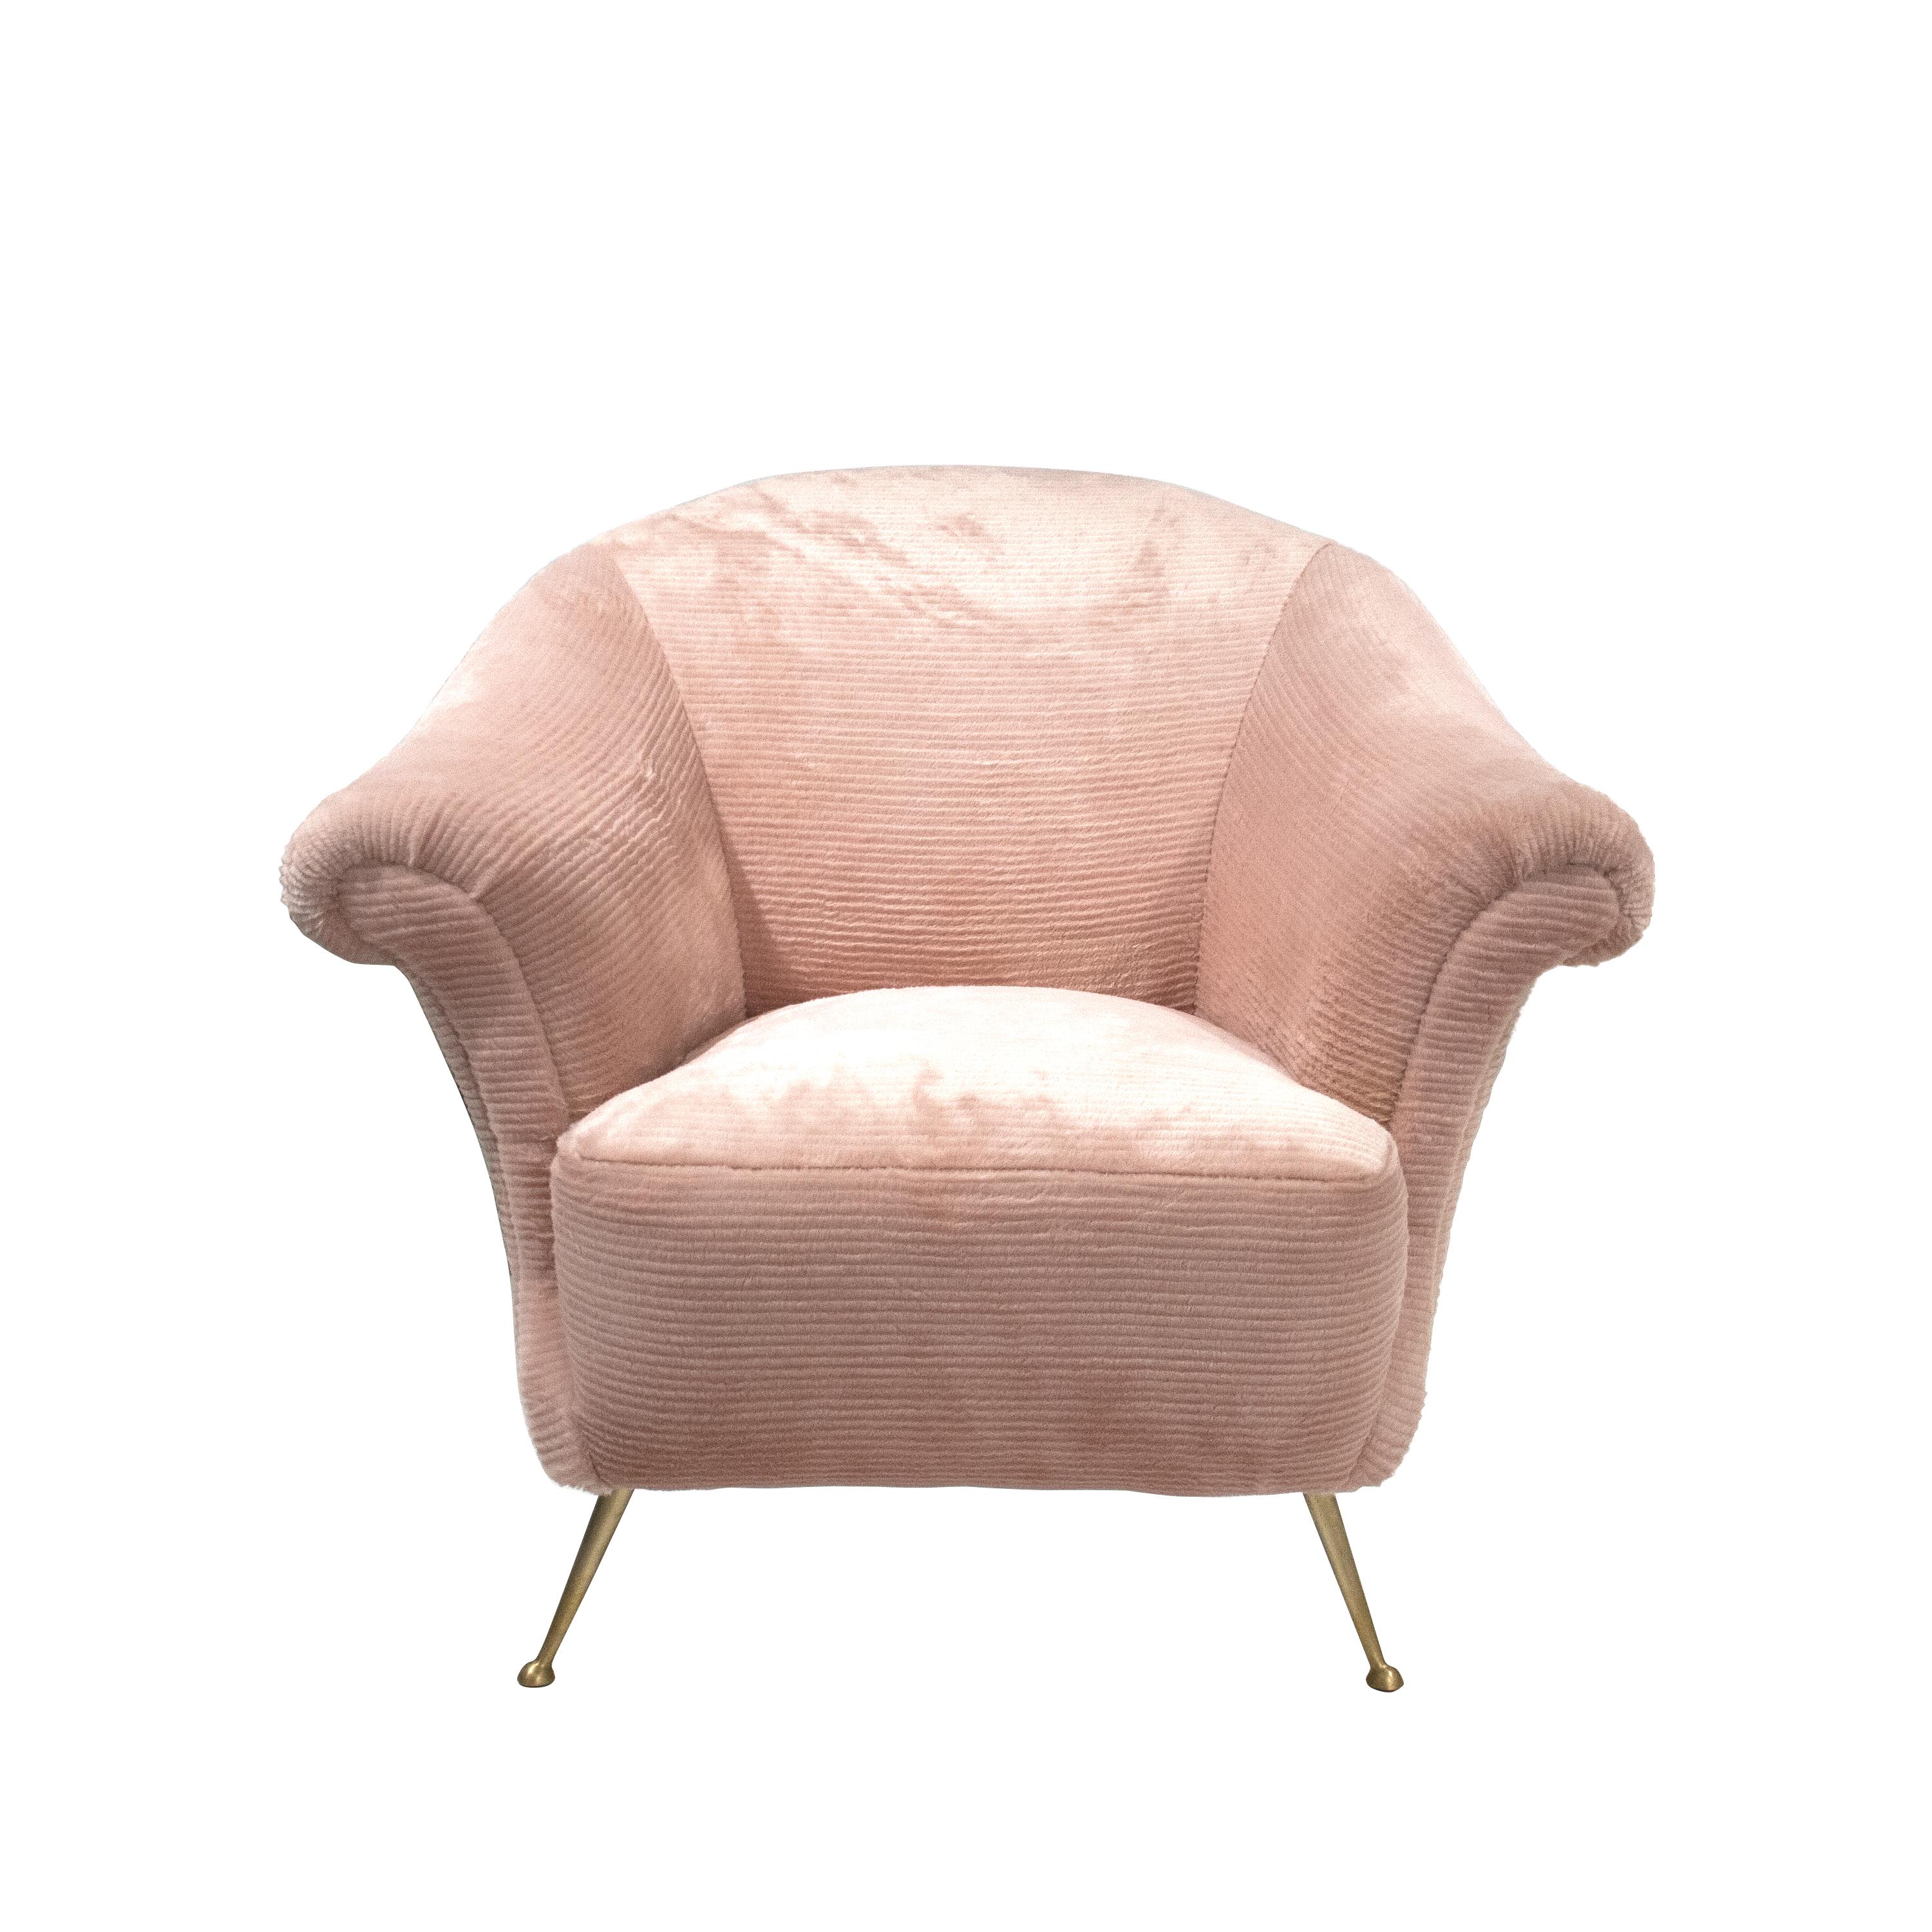 Mid-Century Modern pair of armchairs made of a solid wooden structure with pink line trimmed faux fur upholstery finished with brass legs.